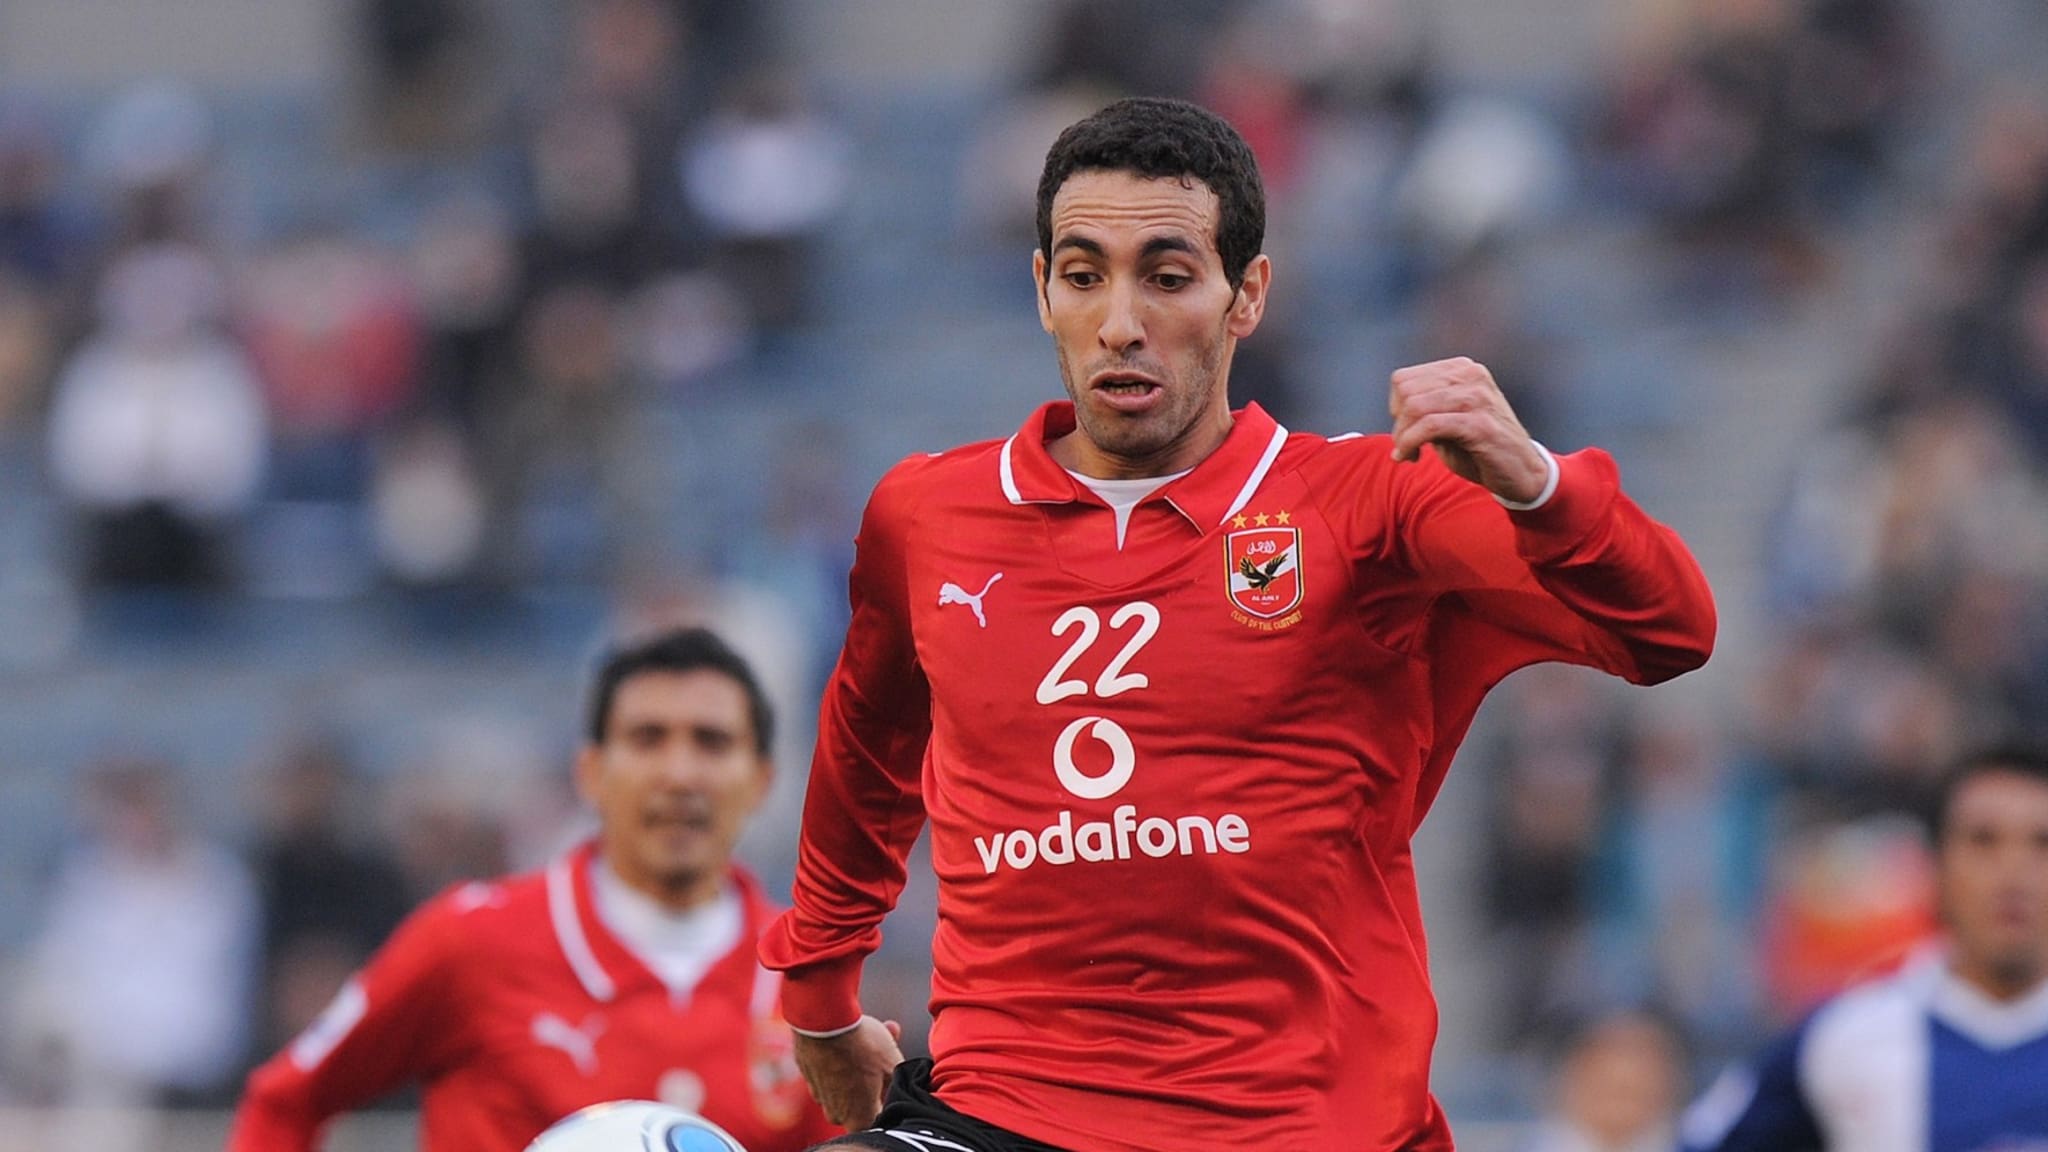 Mohamed Aboutrika at the FIFA Club World Cup Japan 2008